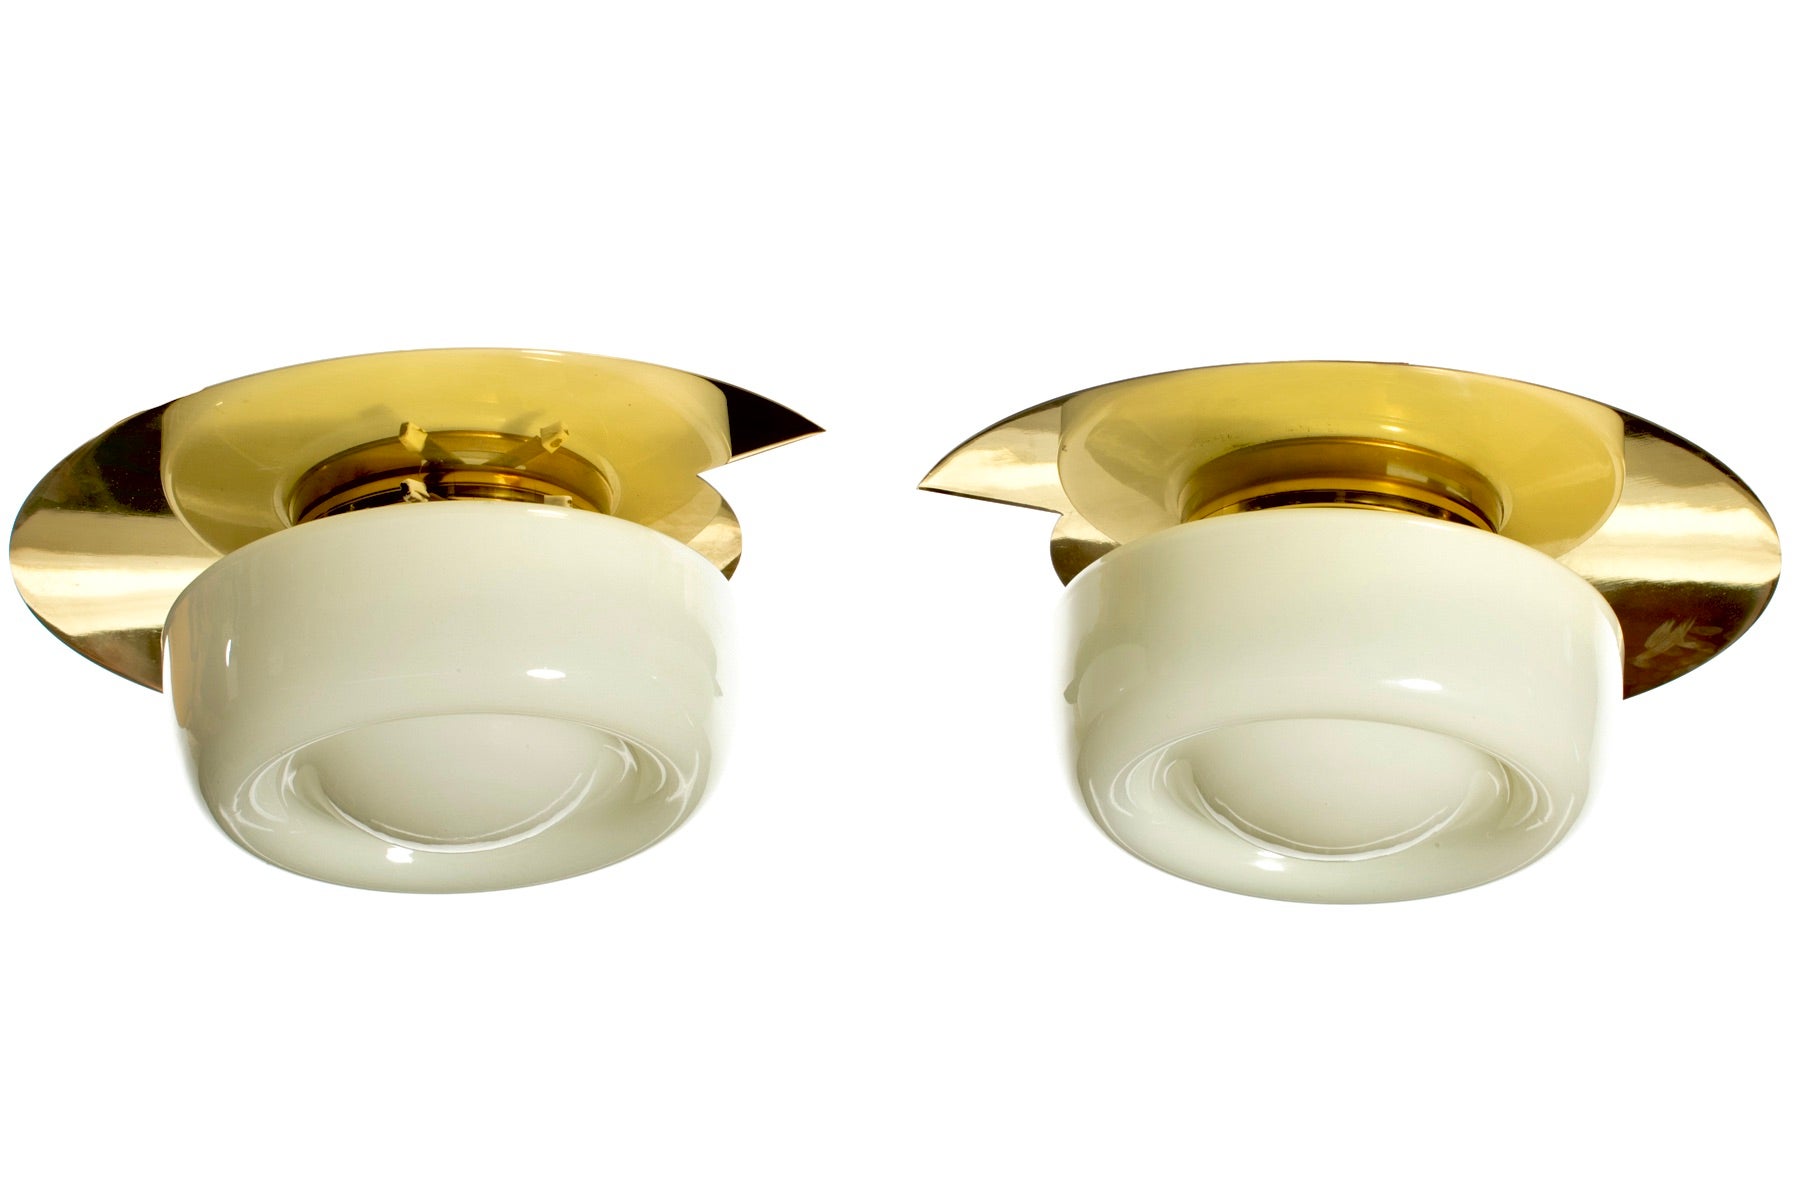 Wonderful pair of 1930s true Art Deco sconces or flush mount brass and glass lights fully professionally restored from top to bottom with new UL certified wiring. Ciao bella! These Italian Art Deco lights are large and attract attention. Versatile